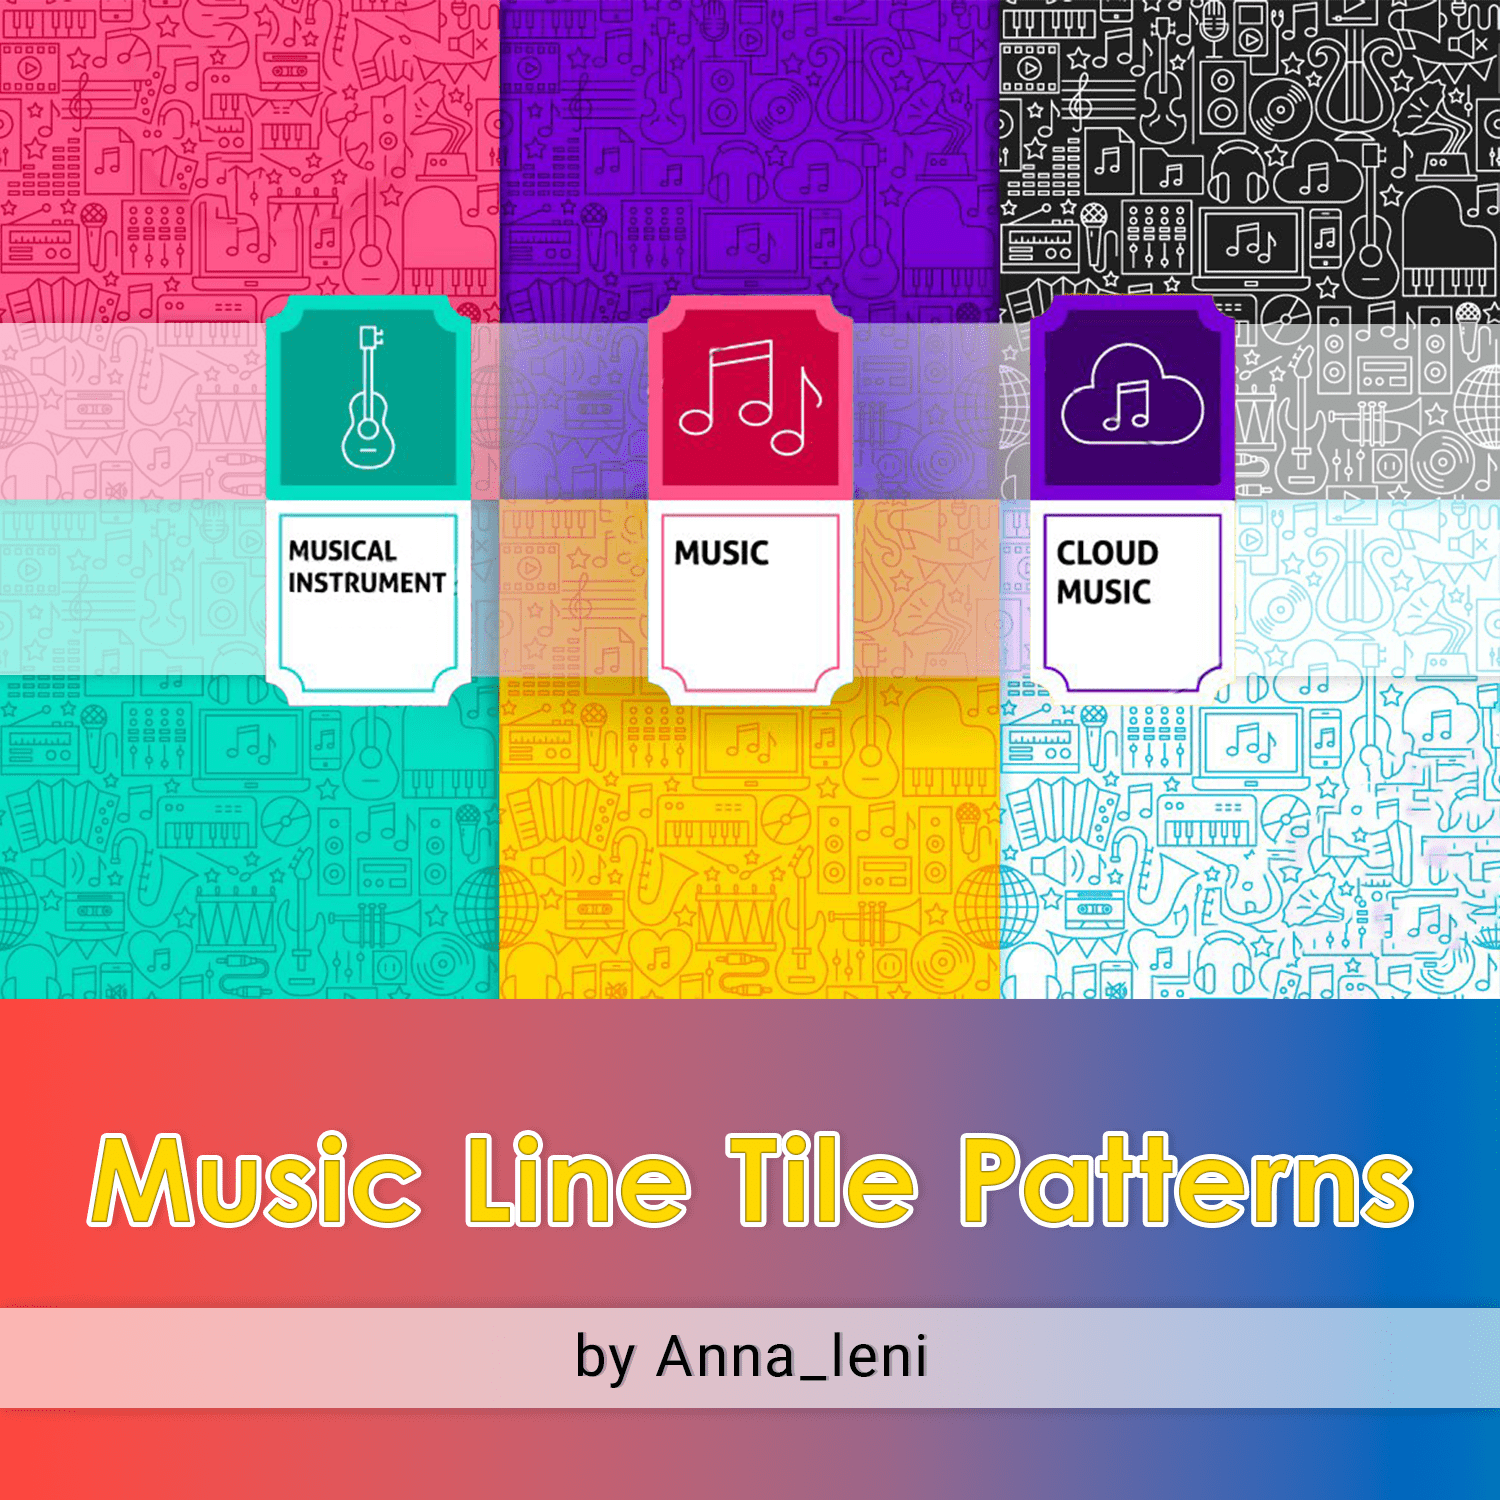 Music Line Tile Patterns cover.